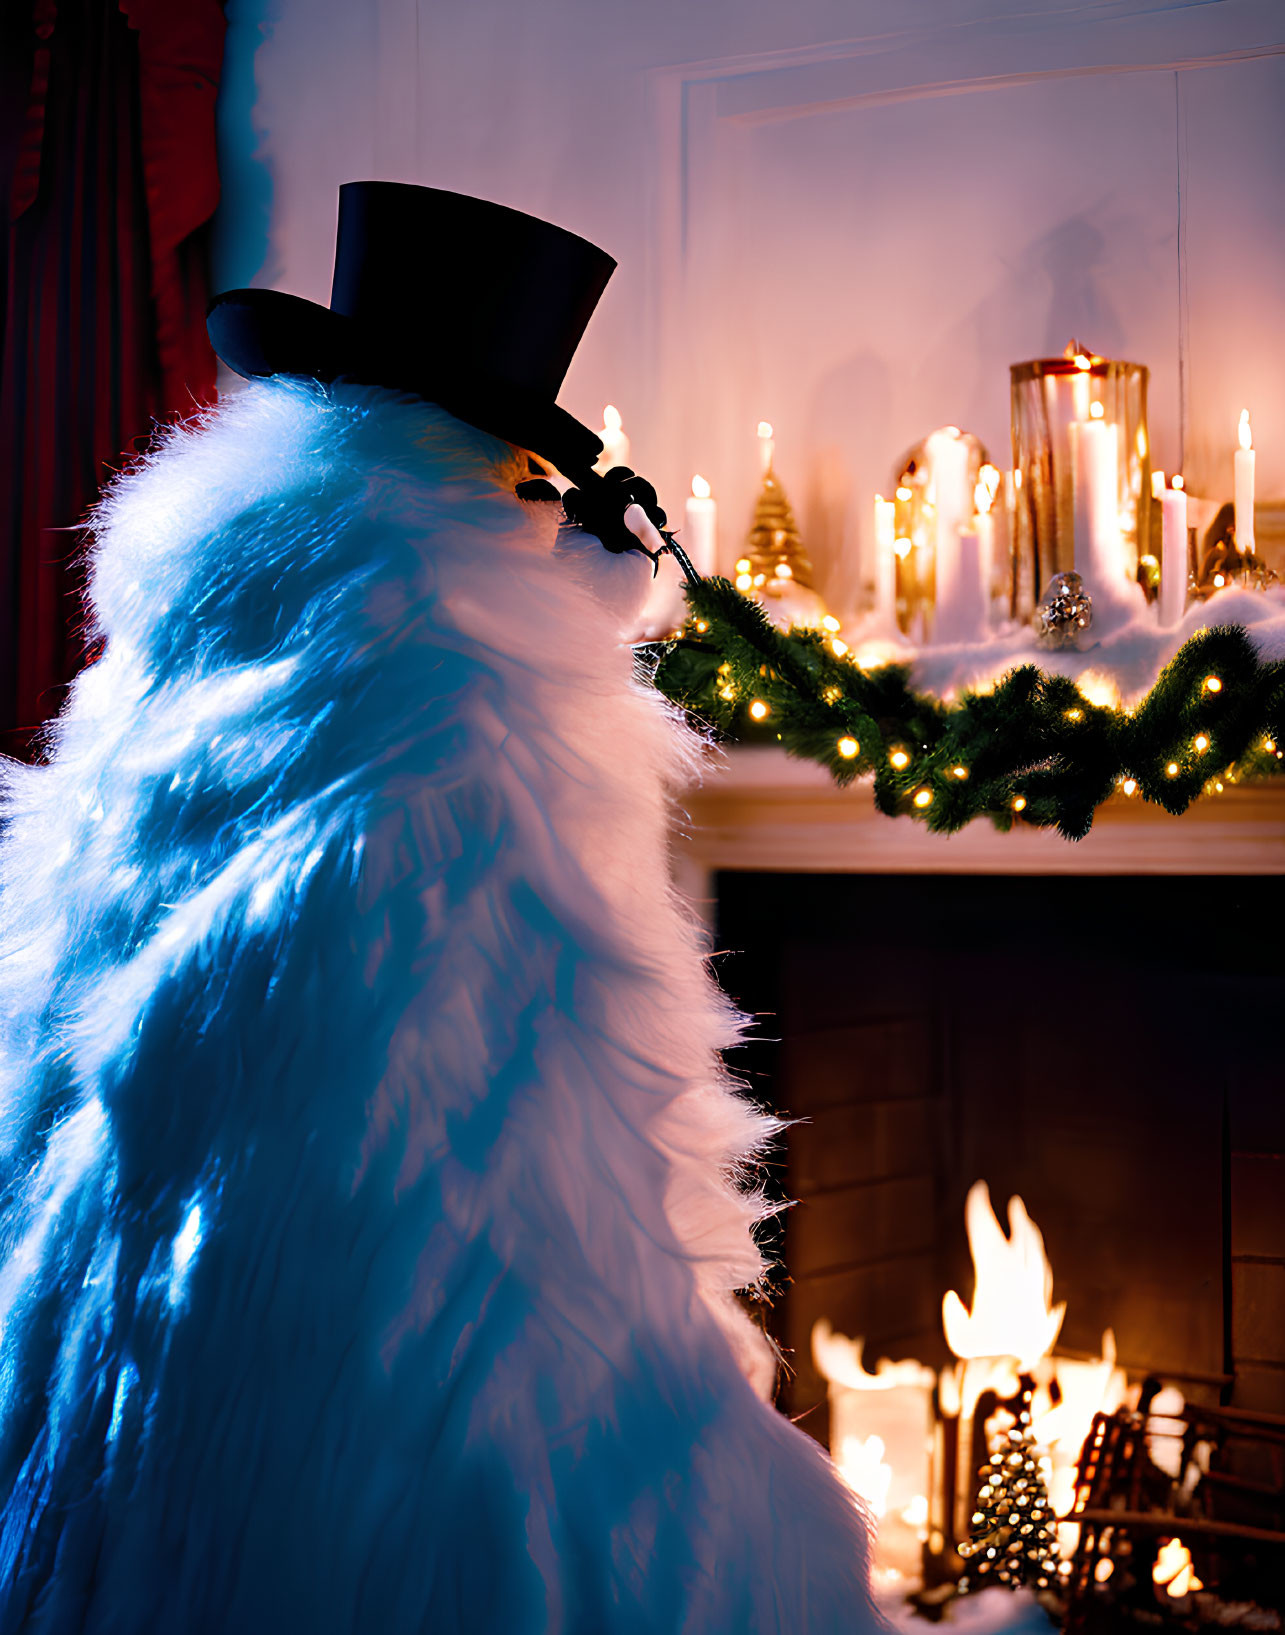 Person in white feathery outfit by festive fireplace